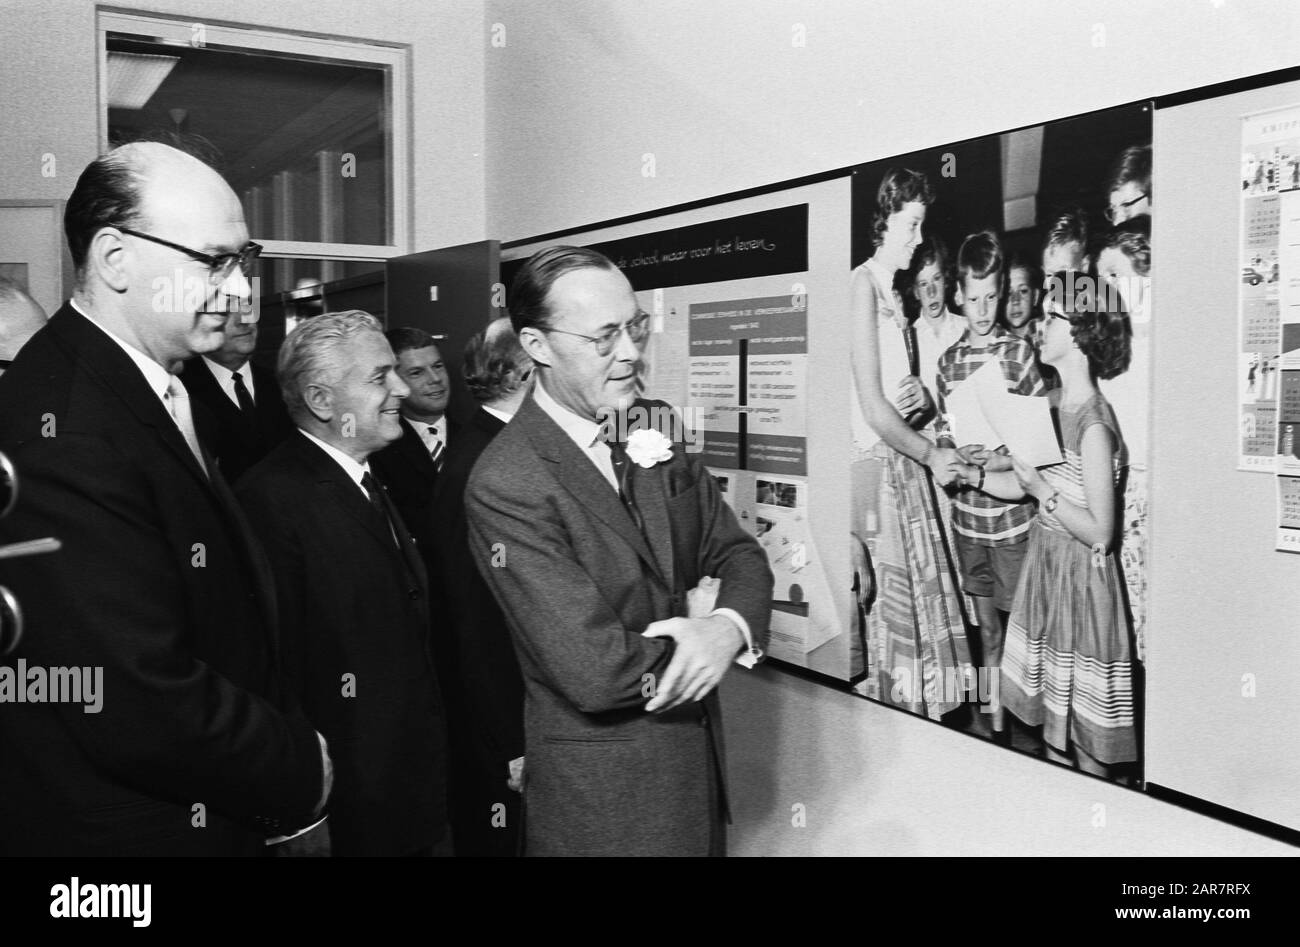 Prins Bernhard opened building Safe Traffic in Hilversum, during the tour Date: May 17, 1963 Location: Hilversum Keywords: buildings, openings, princes, roundings Personal name: Bernhard, prince Institution name: Safe Traffic Netherlands Stock Photo